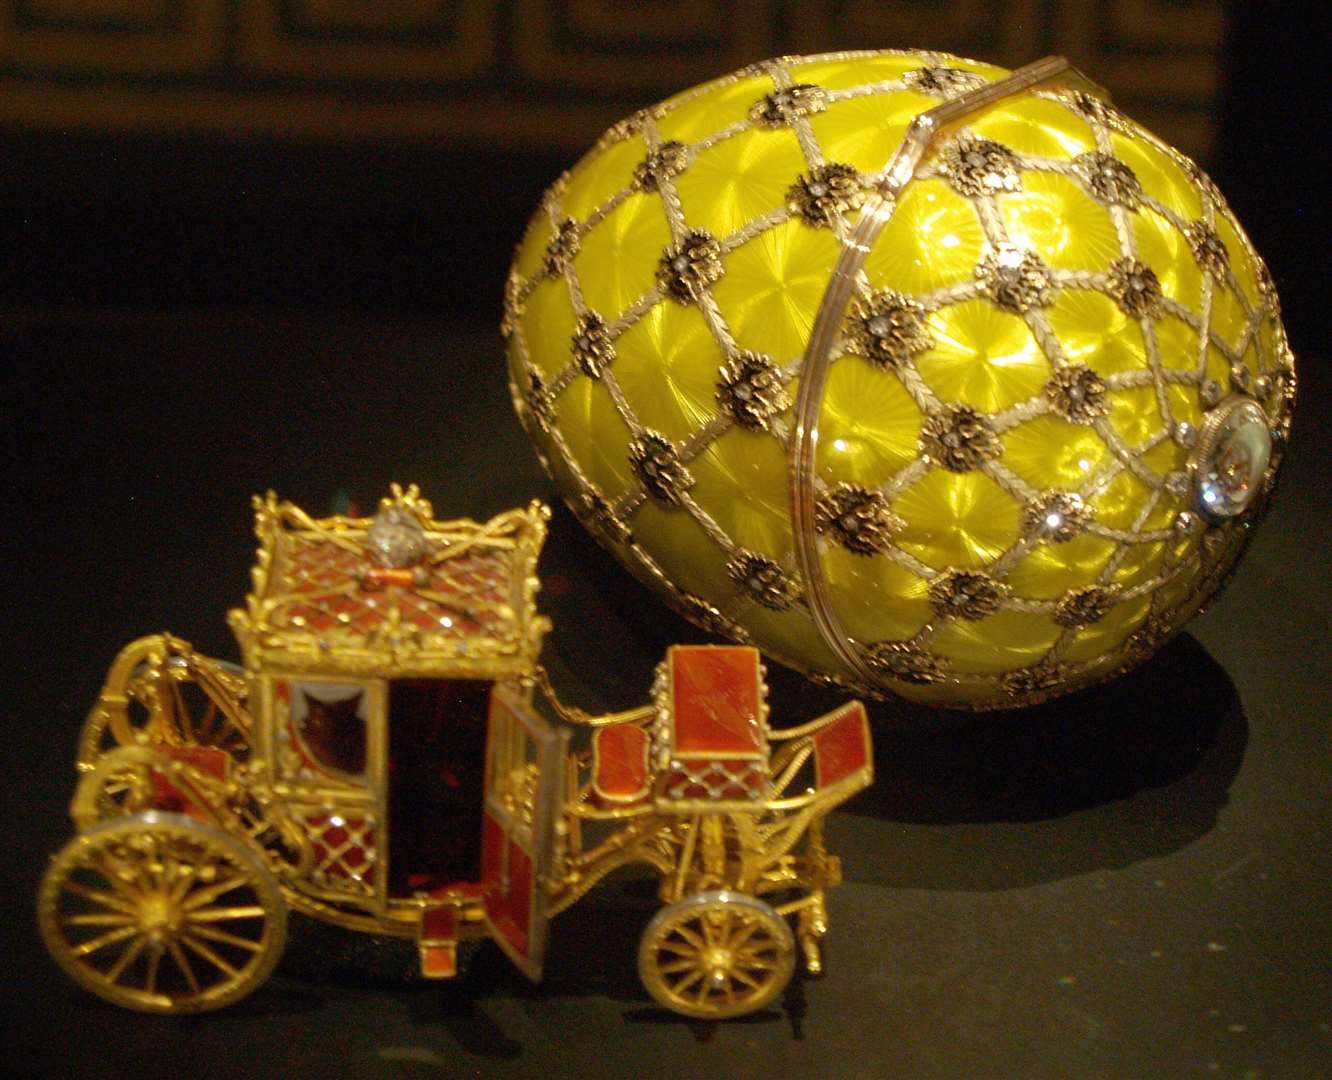 The Imperial Coronation Fabergé egg is perhaps his best known work for the Russian Tsars. Picture: Miguel Hermoso Cuesta